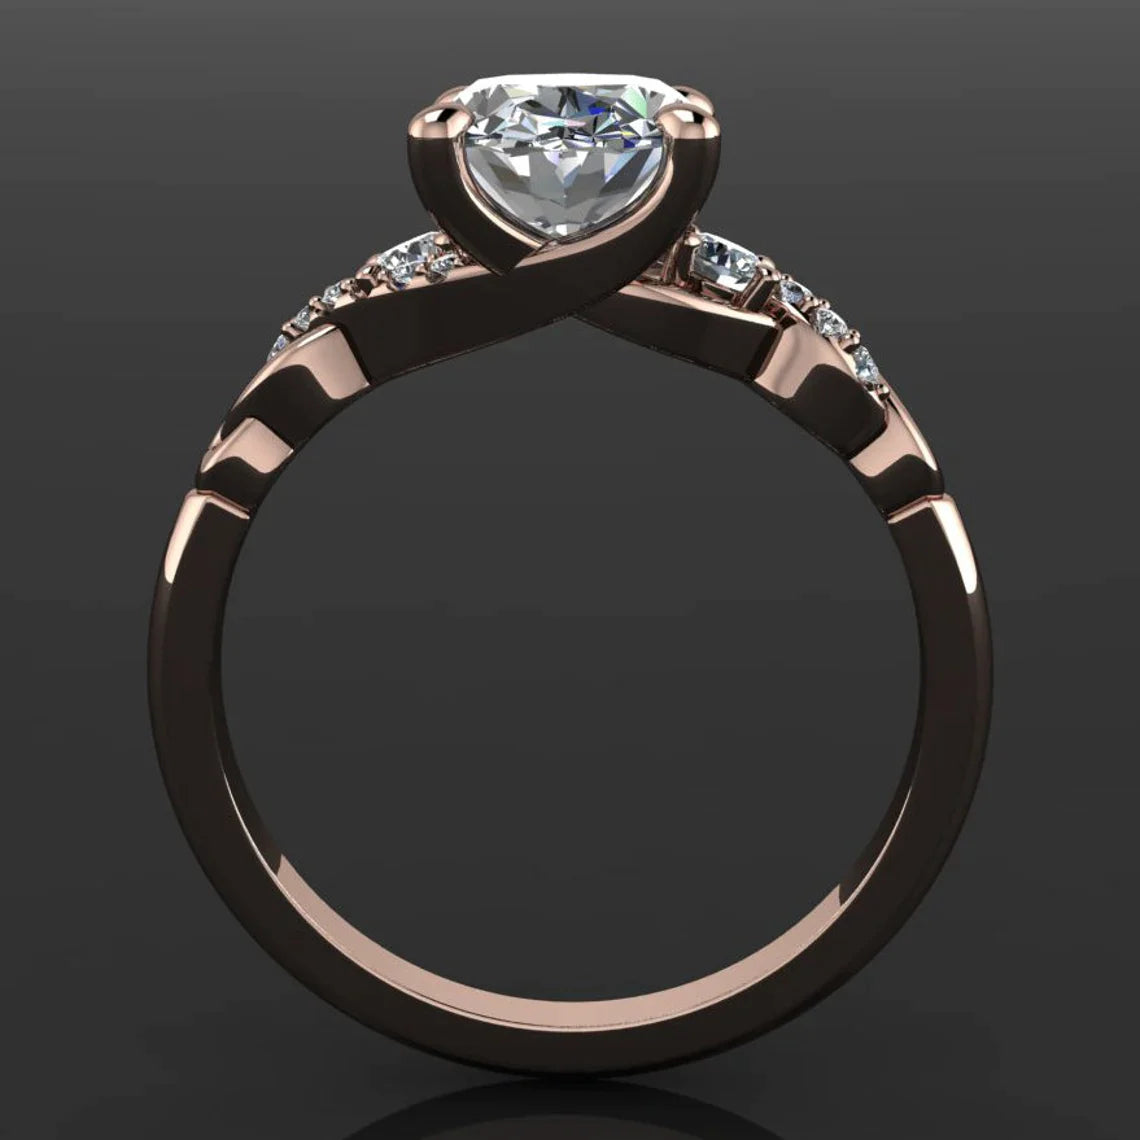 coco ring - 2 carat oval NEO moissanite engagement ring, vintage style engagement ring - J Hollywood Designs